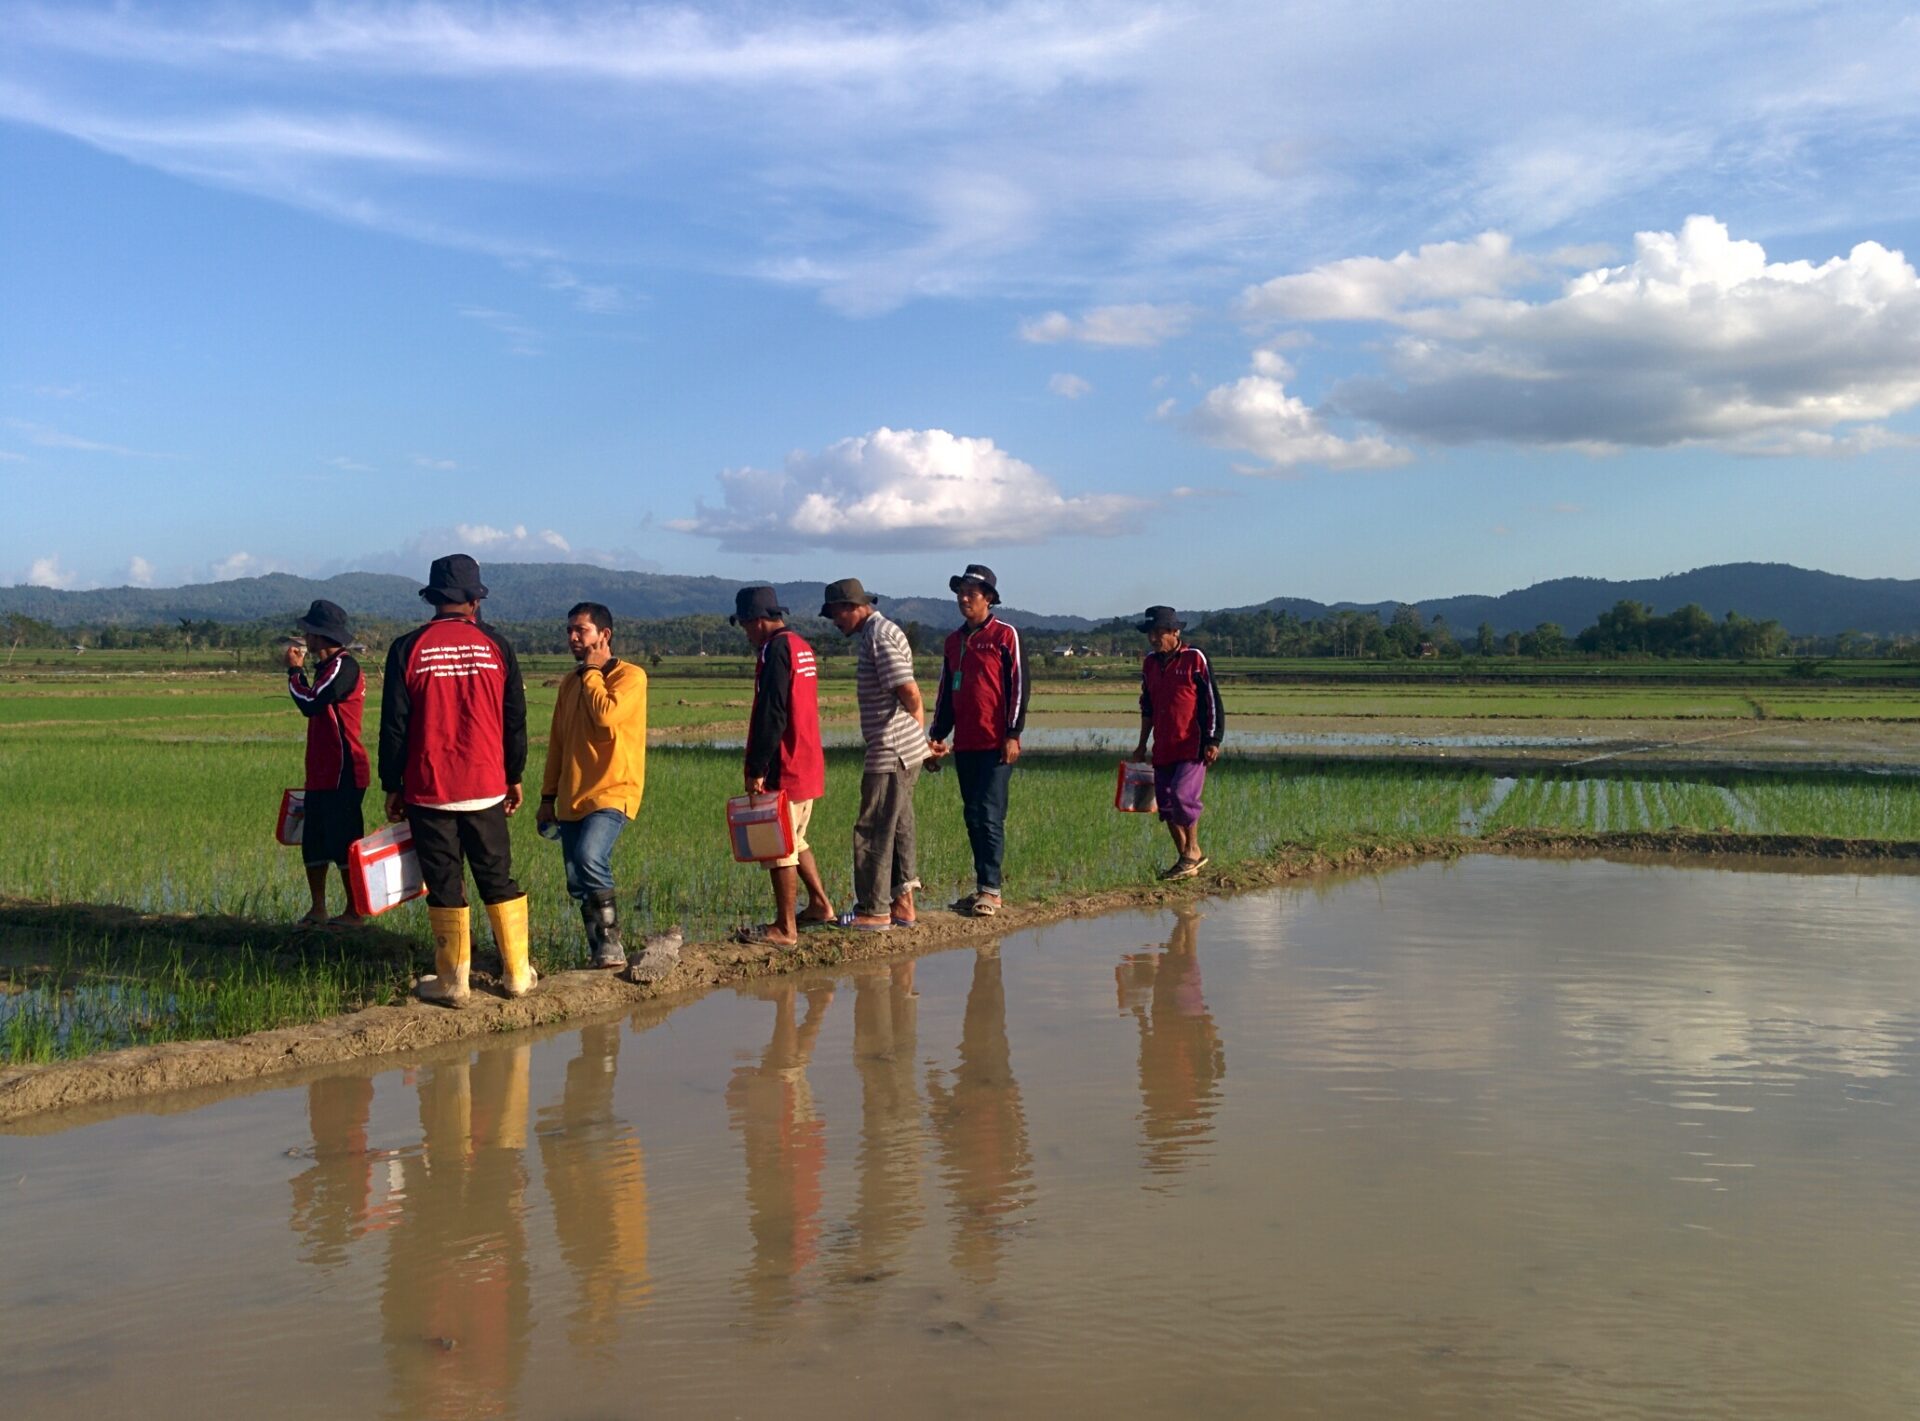 Paddy field observation during Climate Field School in Baruga Village, Kendari. Photo by Mohammad Fadli for USAID APIK